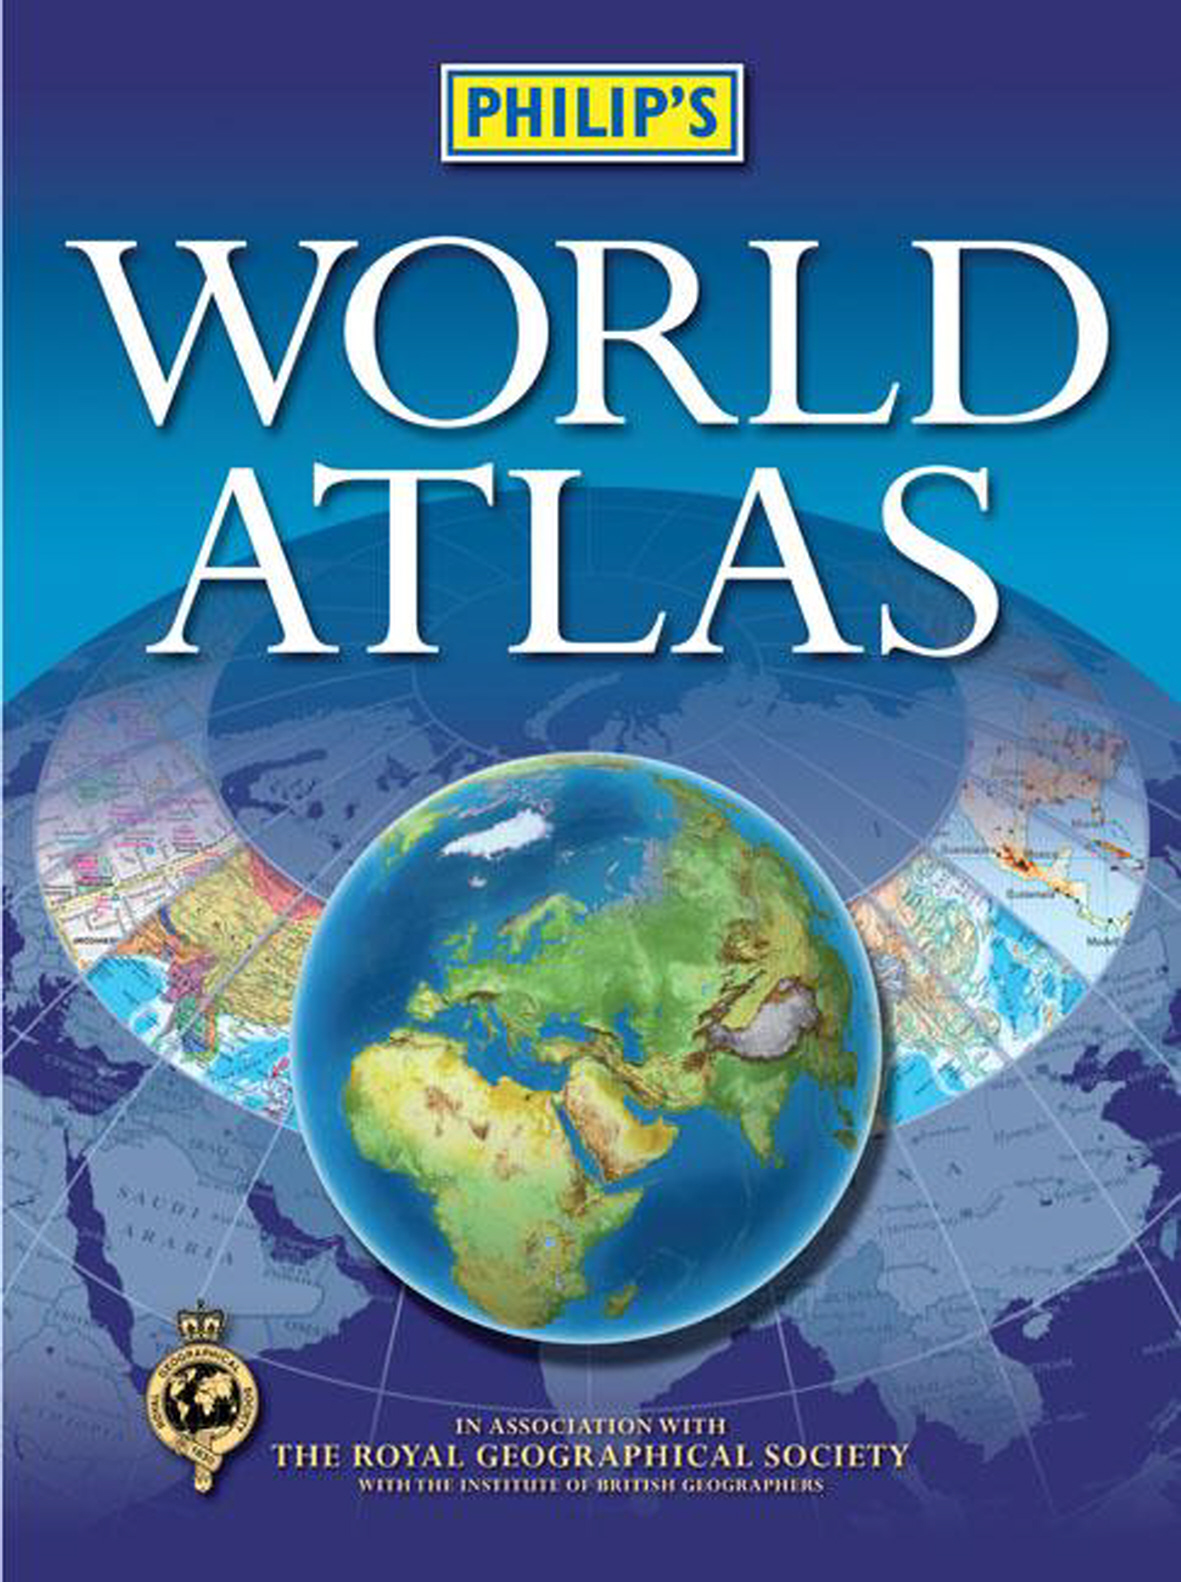 facts-and-history-about-atlas-yes-it-s-amazing